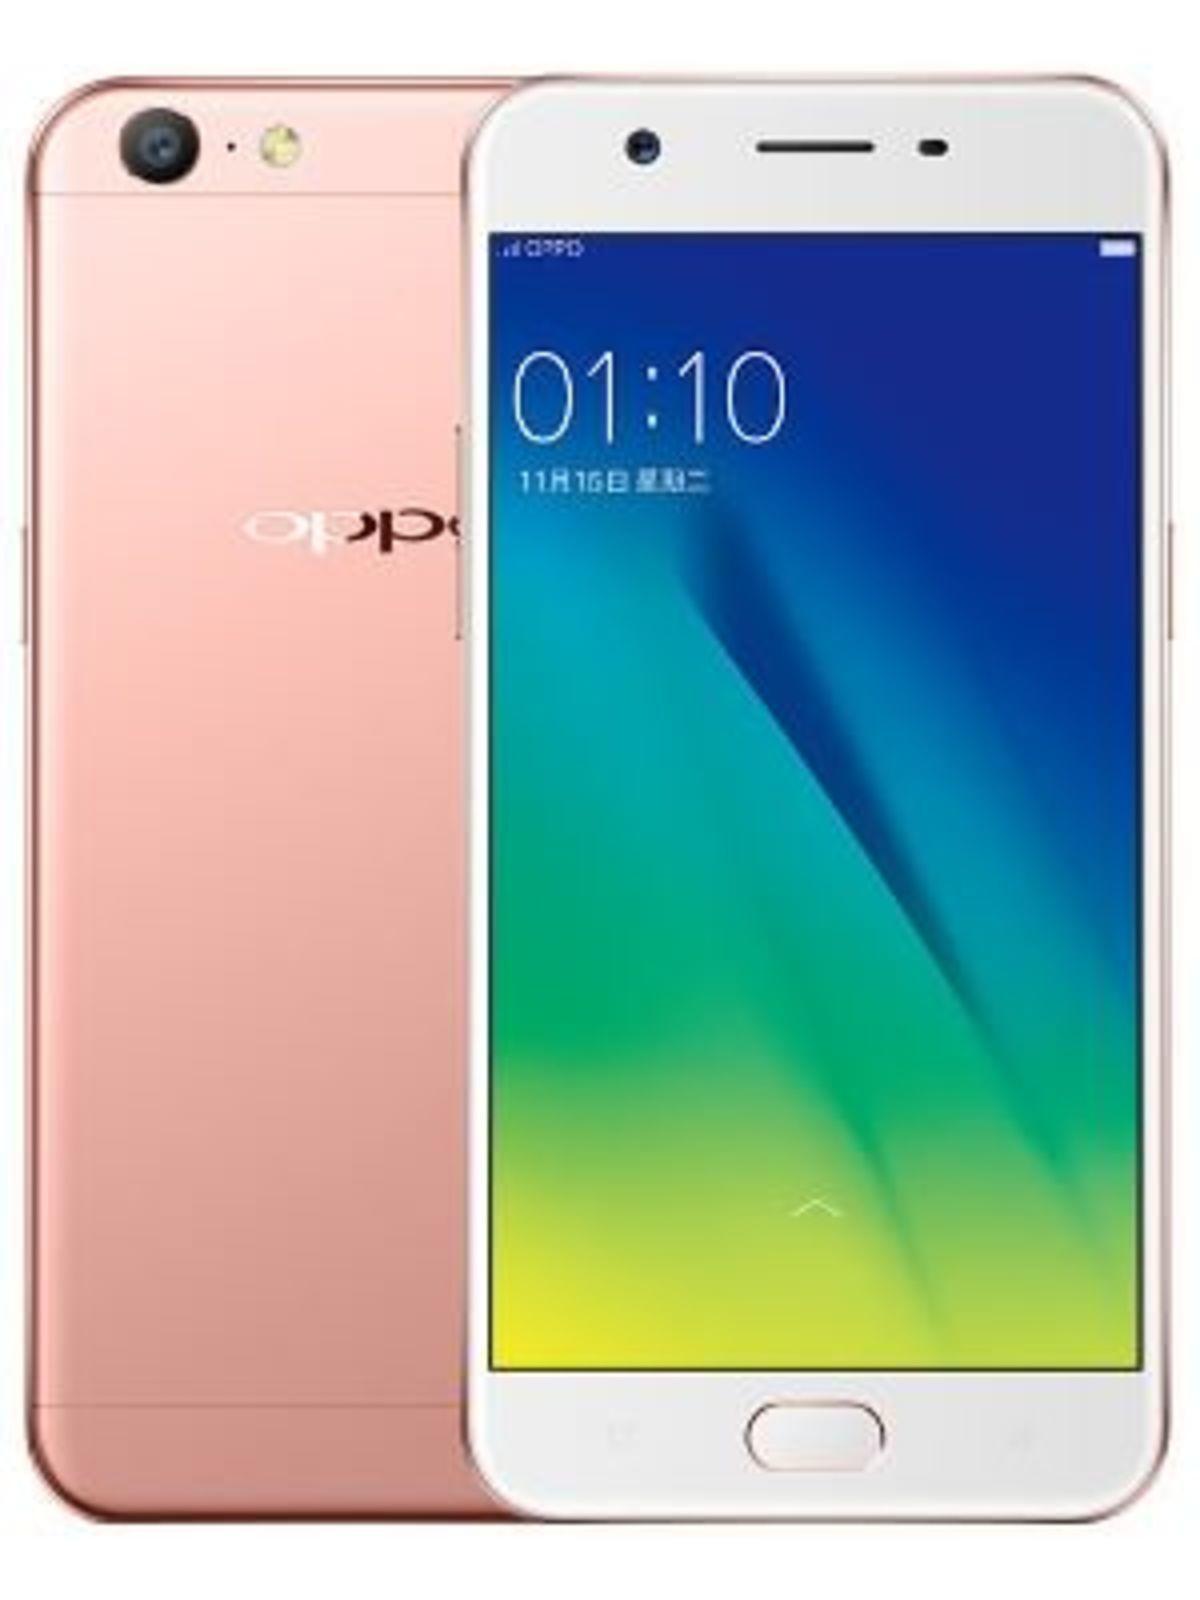 OPPO A57 Price in India, Full Specifications (27th May 2022) at Gadgets Now